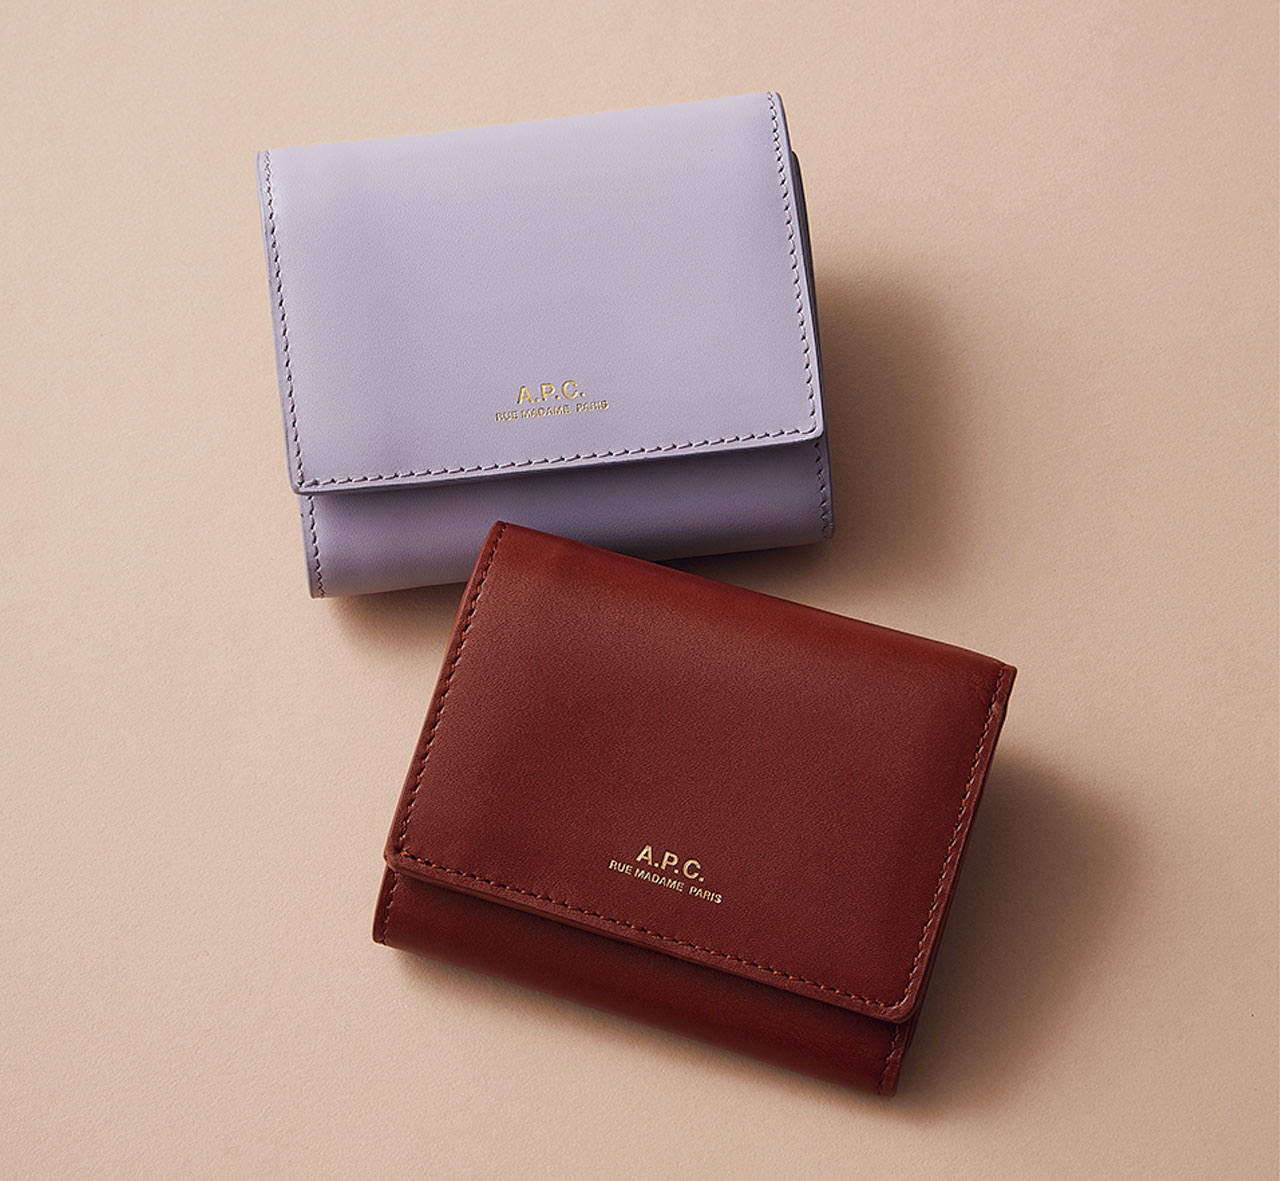 A.P.C.（アー・ペー・セー）　COMPACT LOIS SMALL